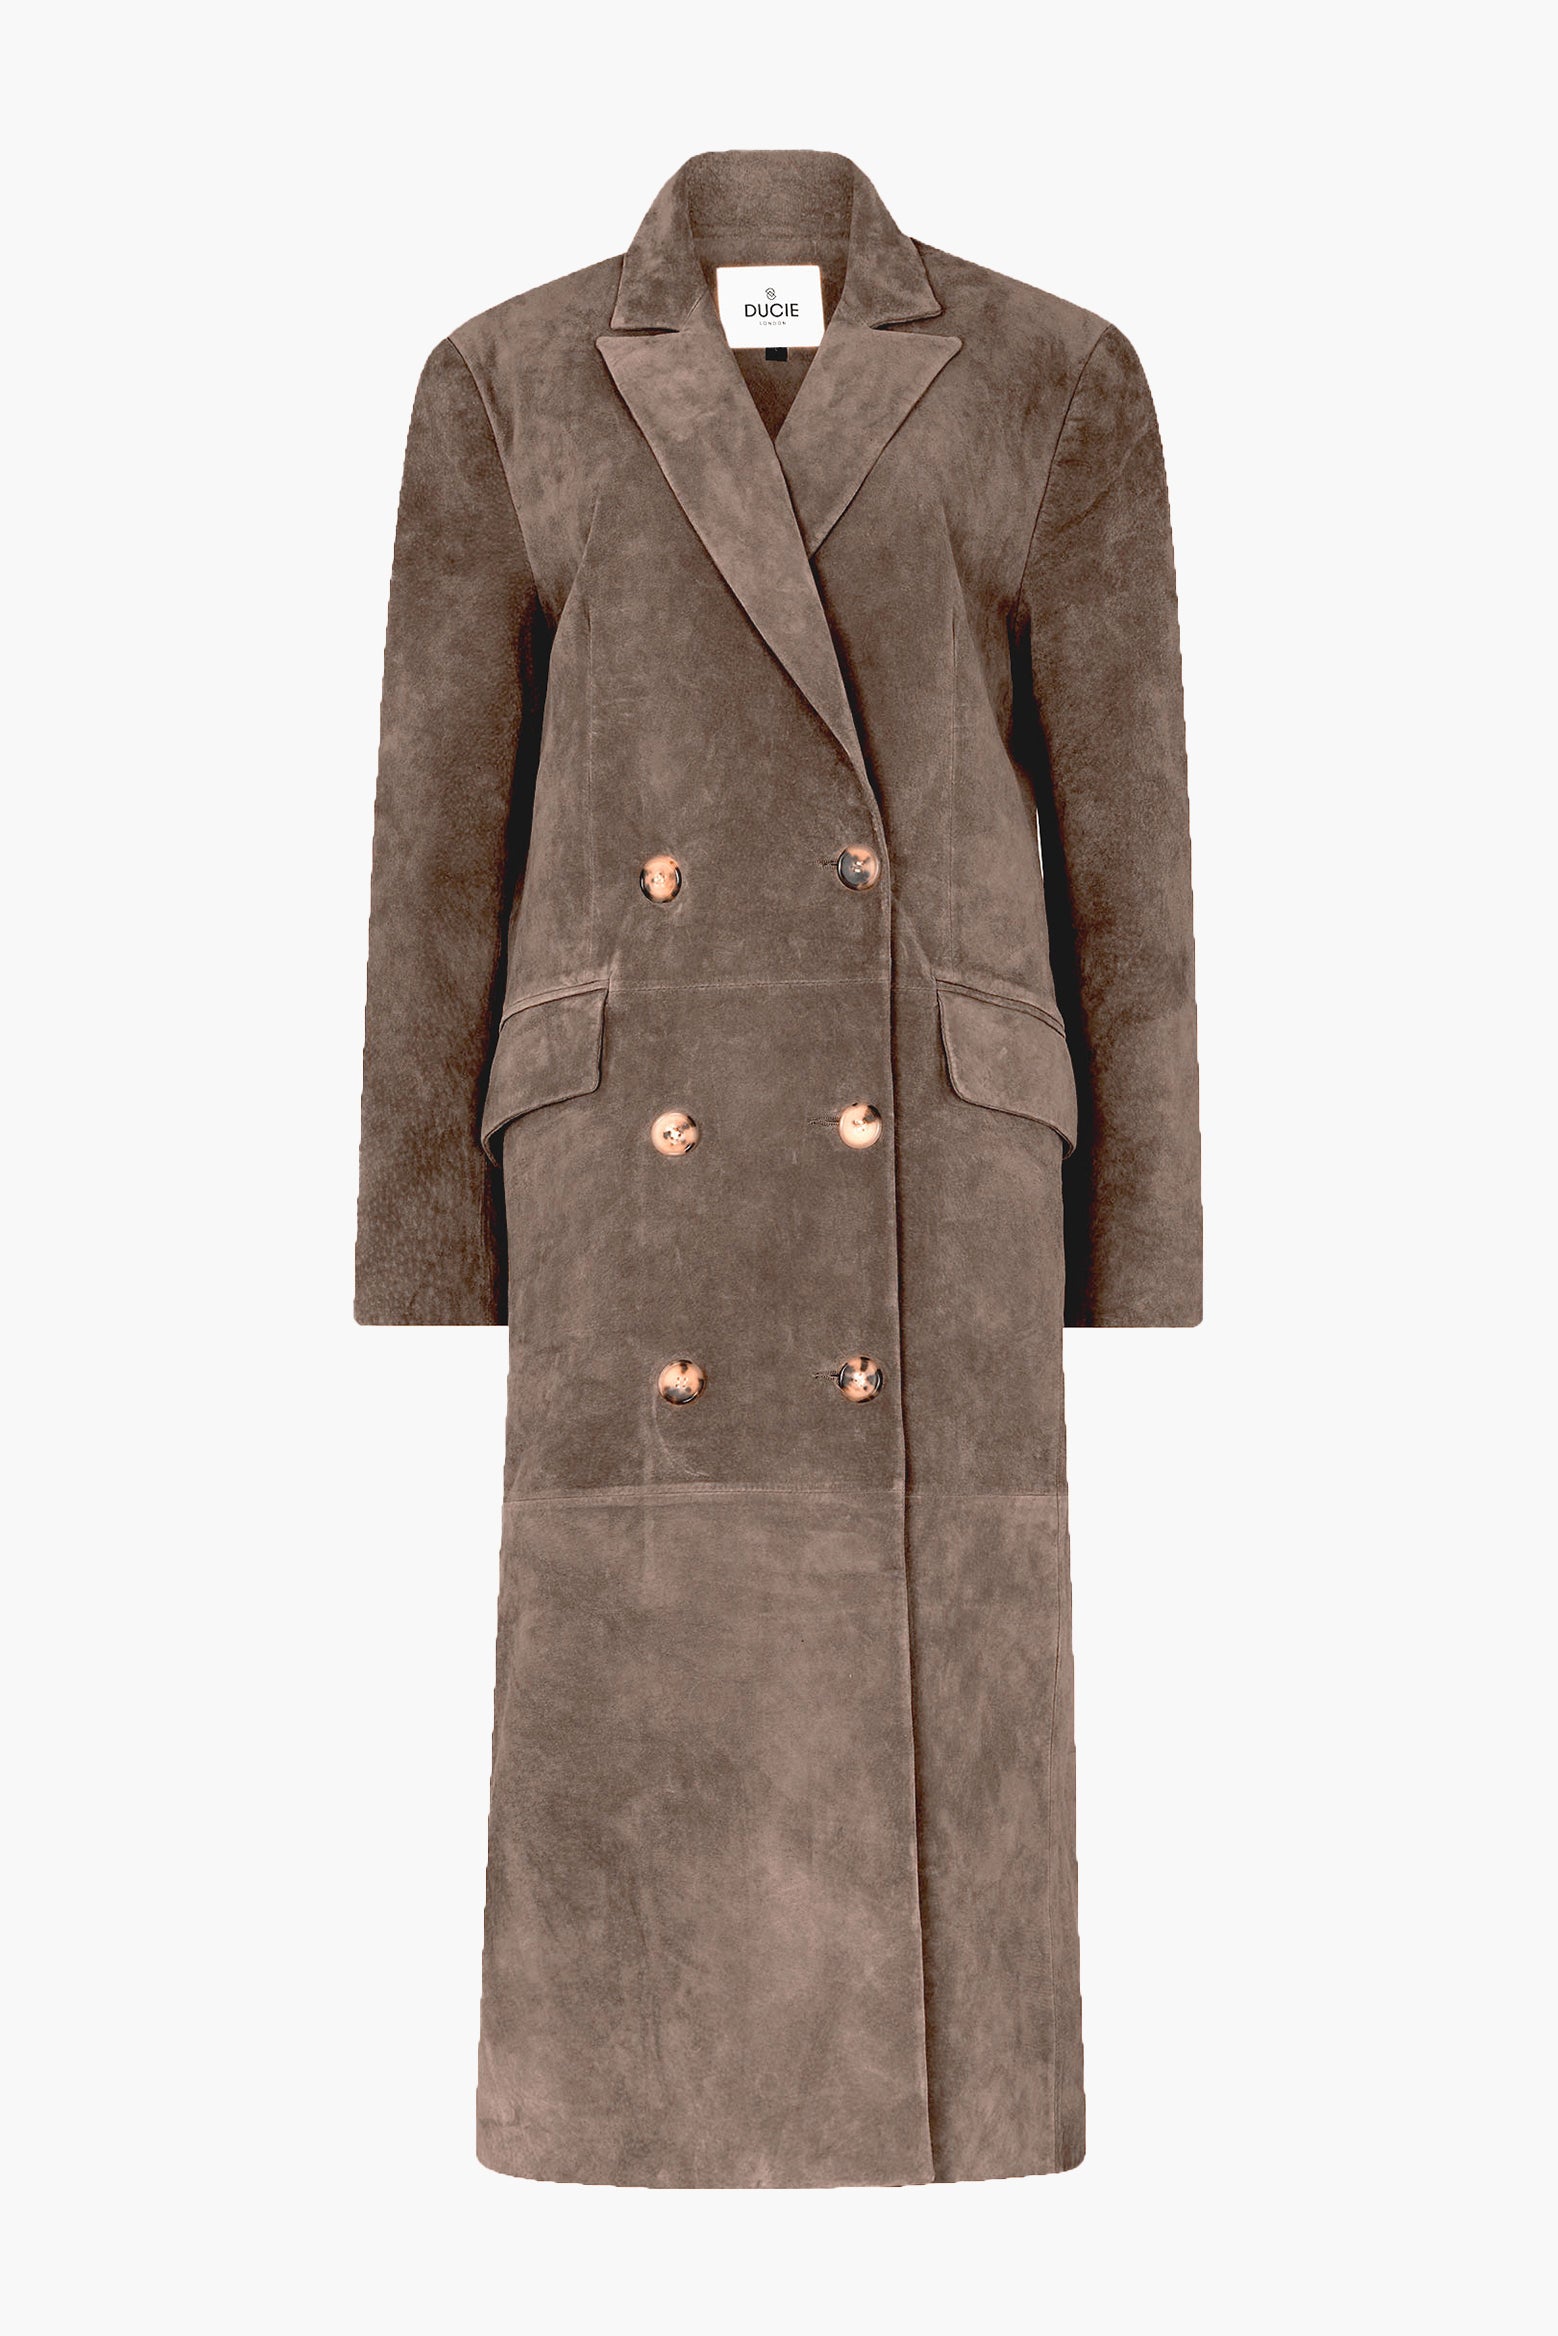 DUCIE LONDON Aggie Suede Coat in Coco available at The New Trend Australia